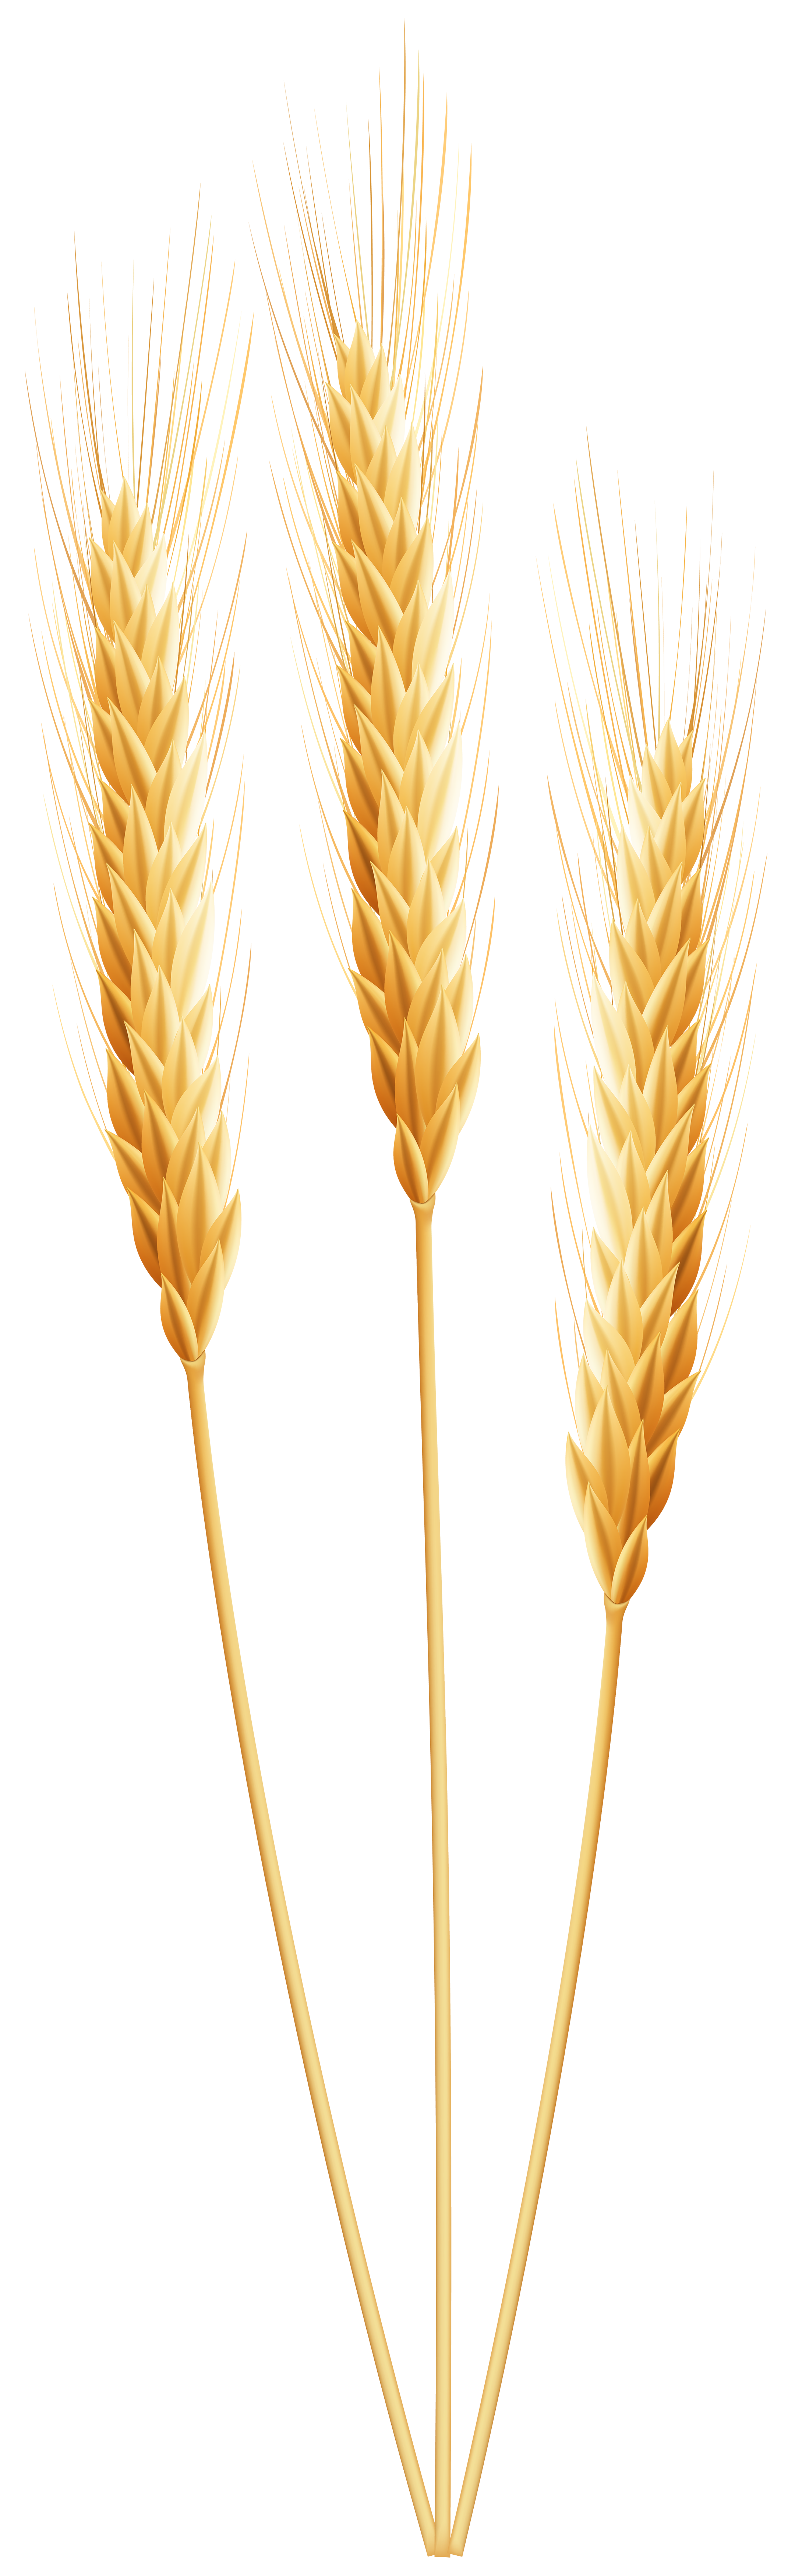 Wheat PNG Clip Art Image